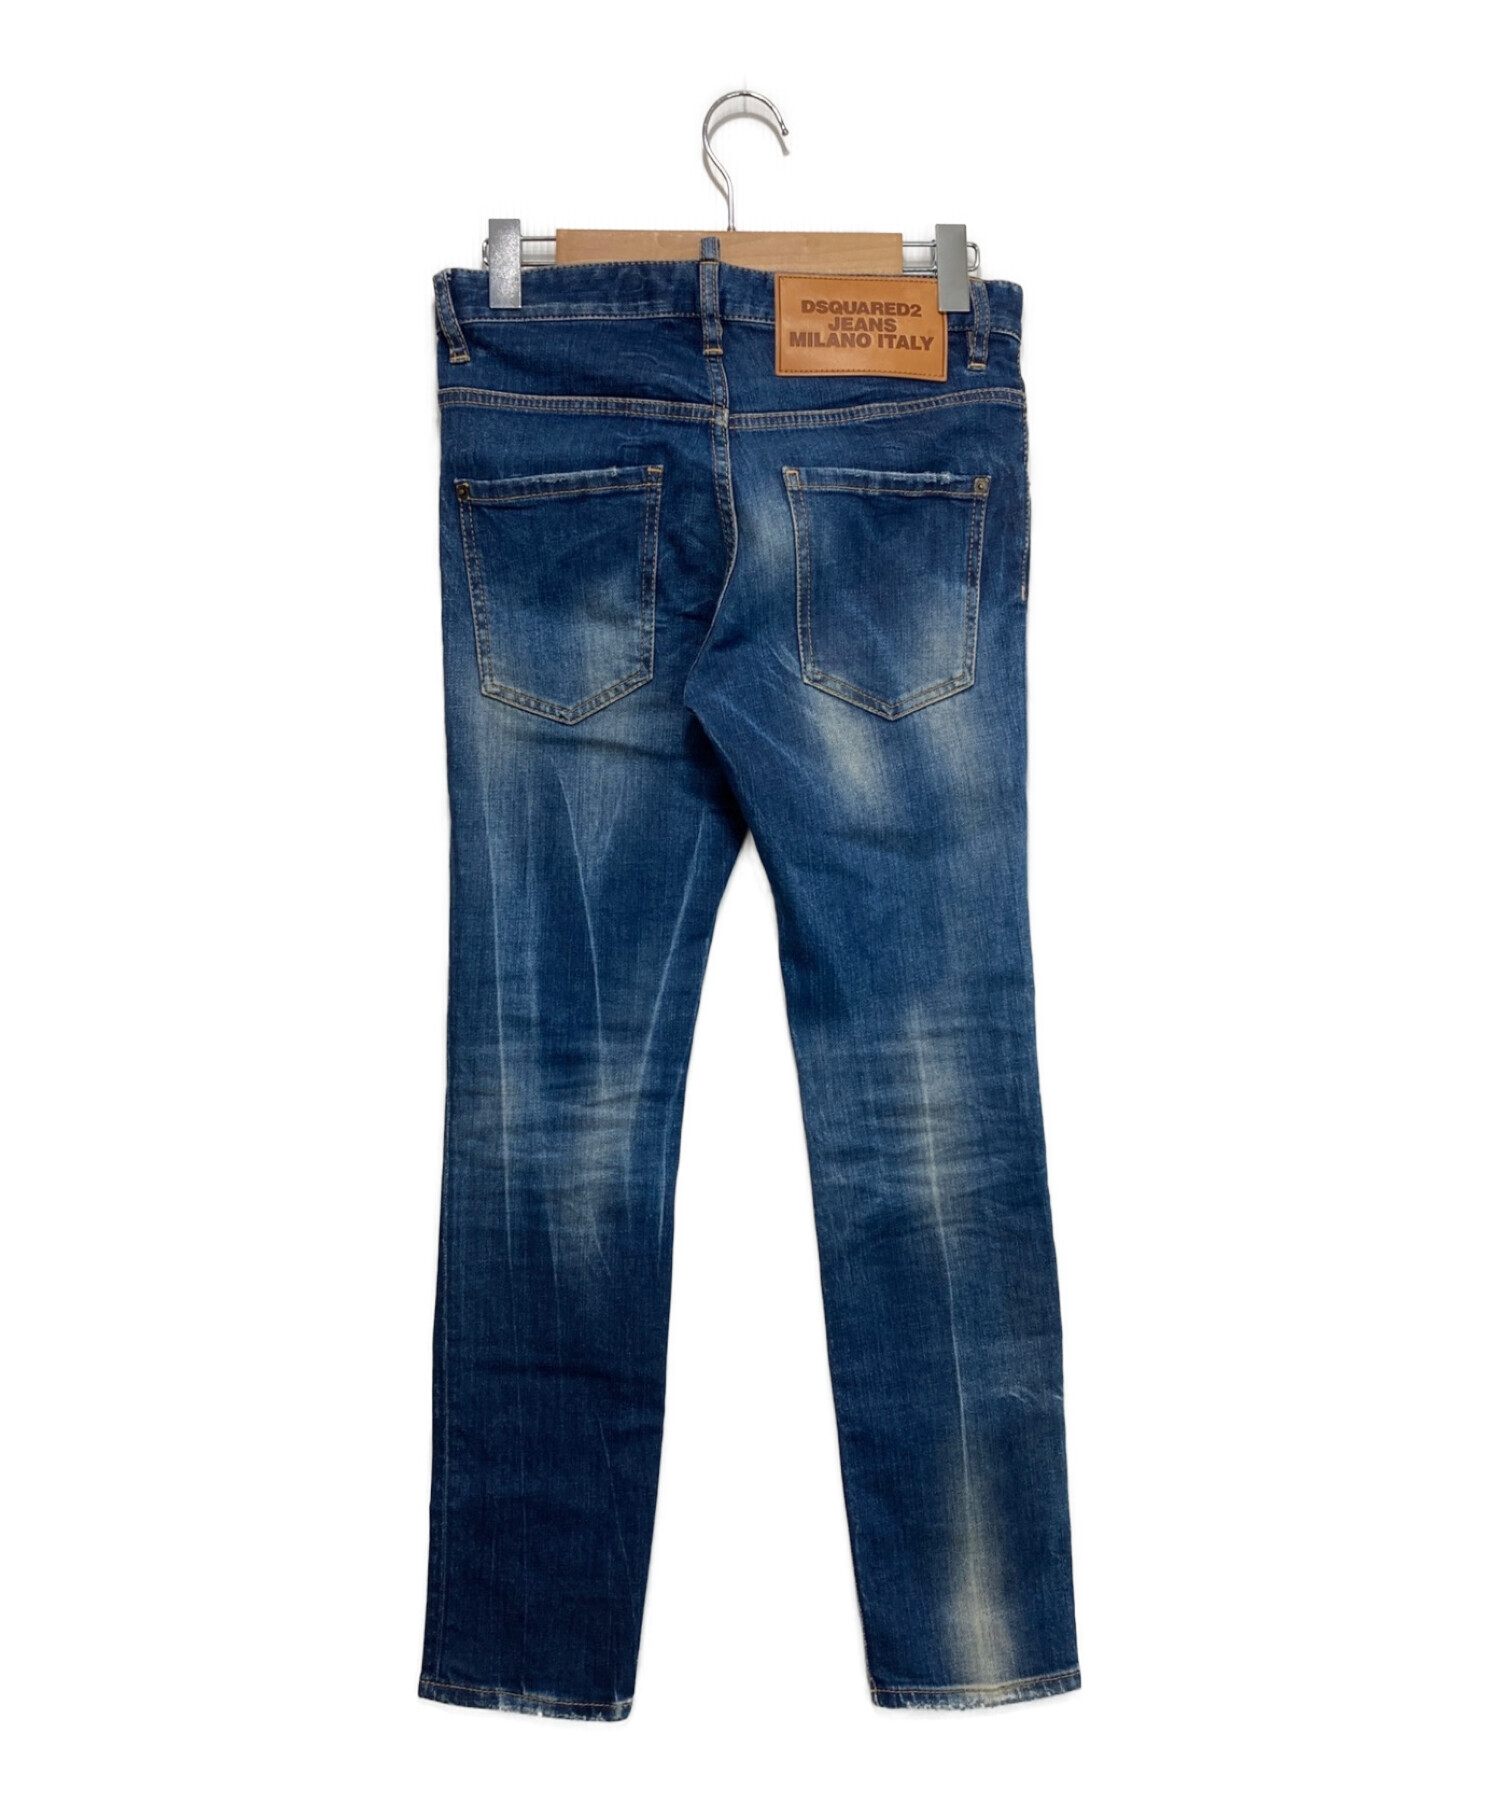 DSQUARED2(ディースクエアード) サイズ:42 22AW SUPER TWINKY JEAN ...